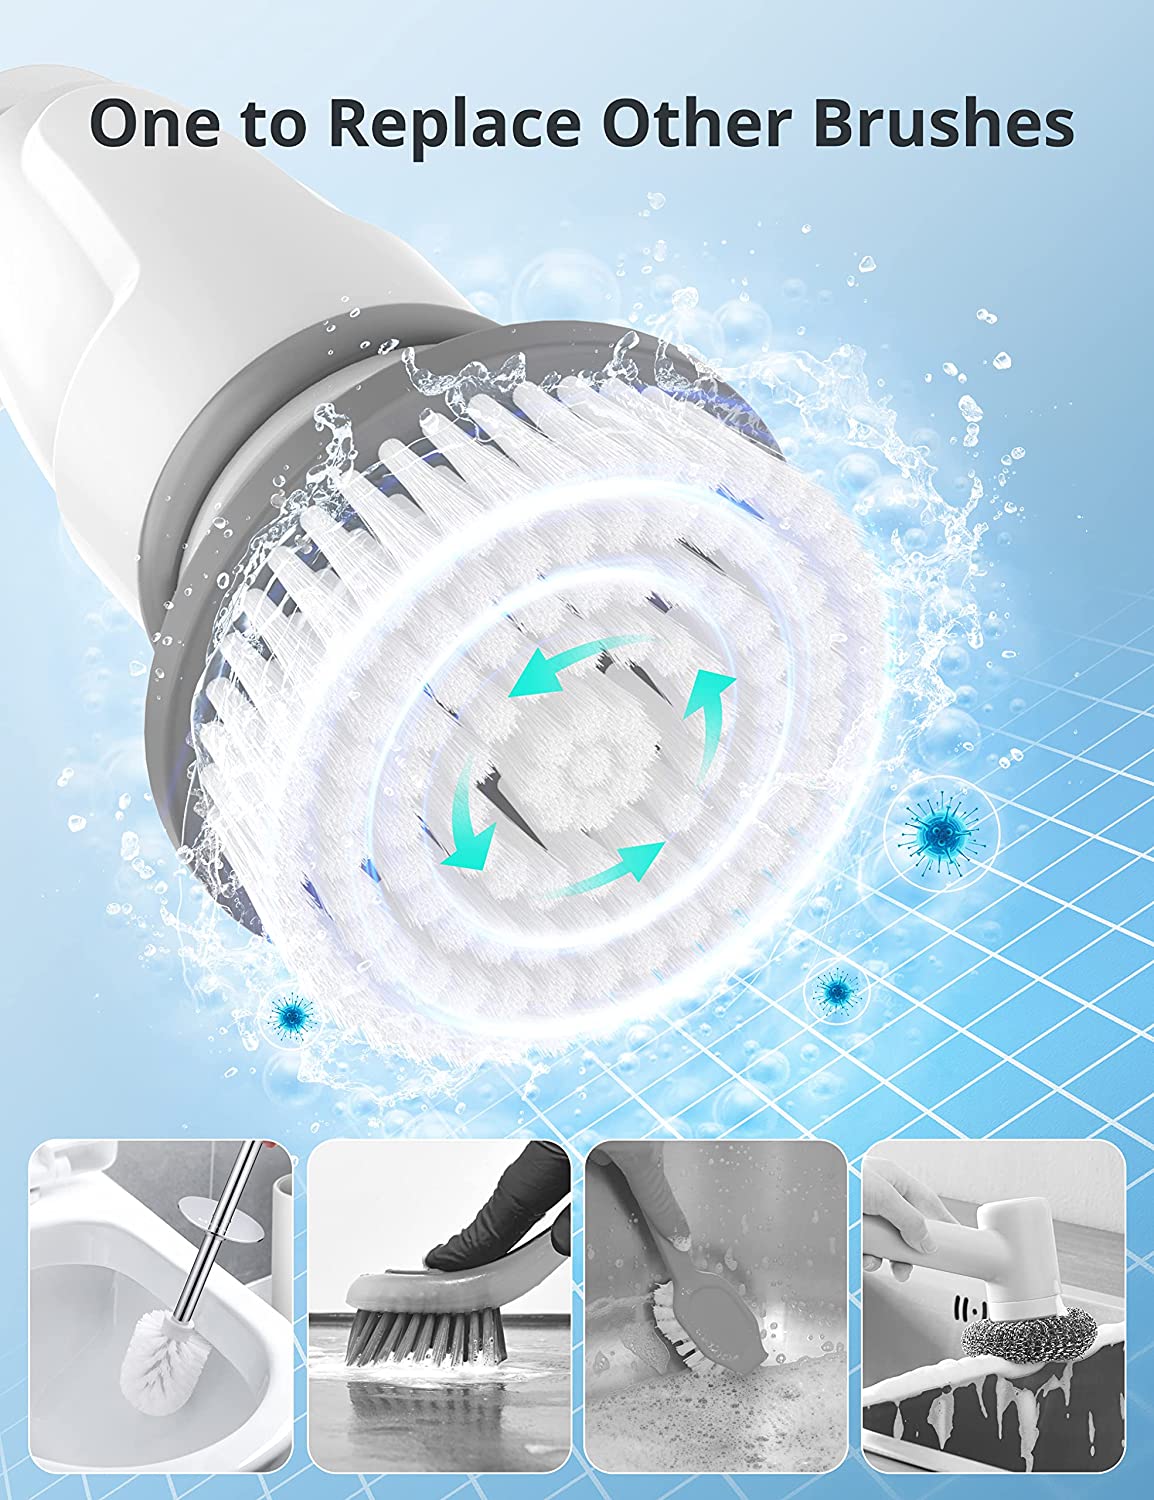 https://discounttoday.net/wp-content/uploads/2022/11/Electric-Spin-Scrubber-Voweek-Cordless-Cleaning-Brush-with-Adjustable-Extension-Arm-4-Replaceable-Cleaning-Heads-Power-Shower-Scrubber-for-Bathroom-Tub-Tile-Floor3.jpg